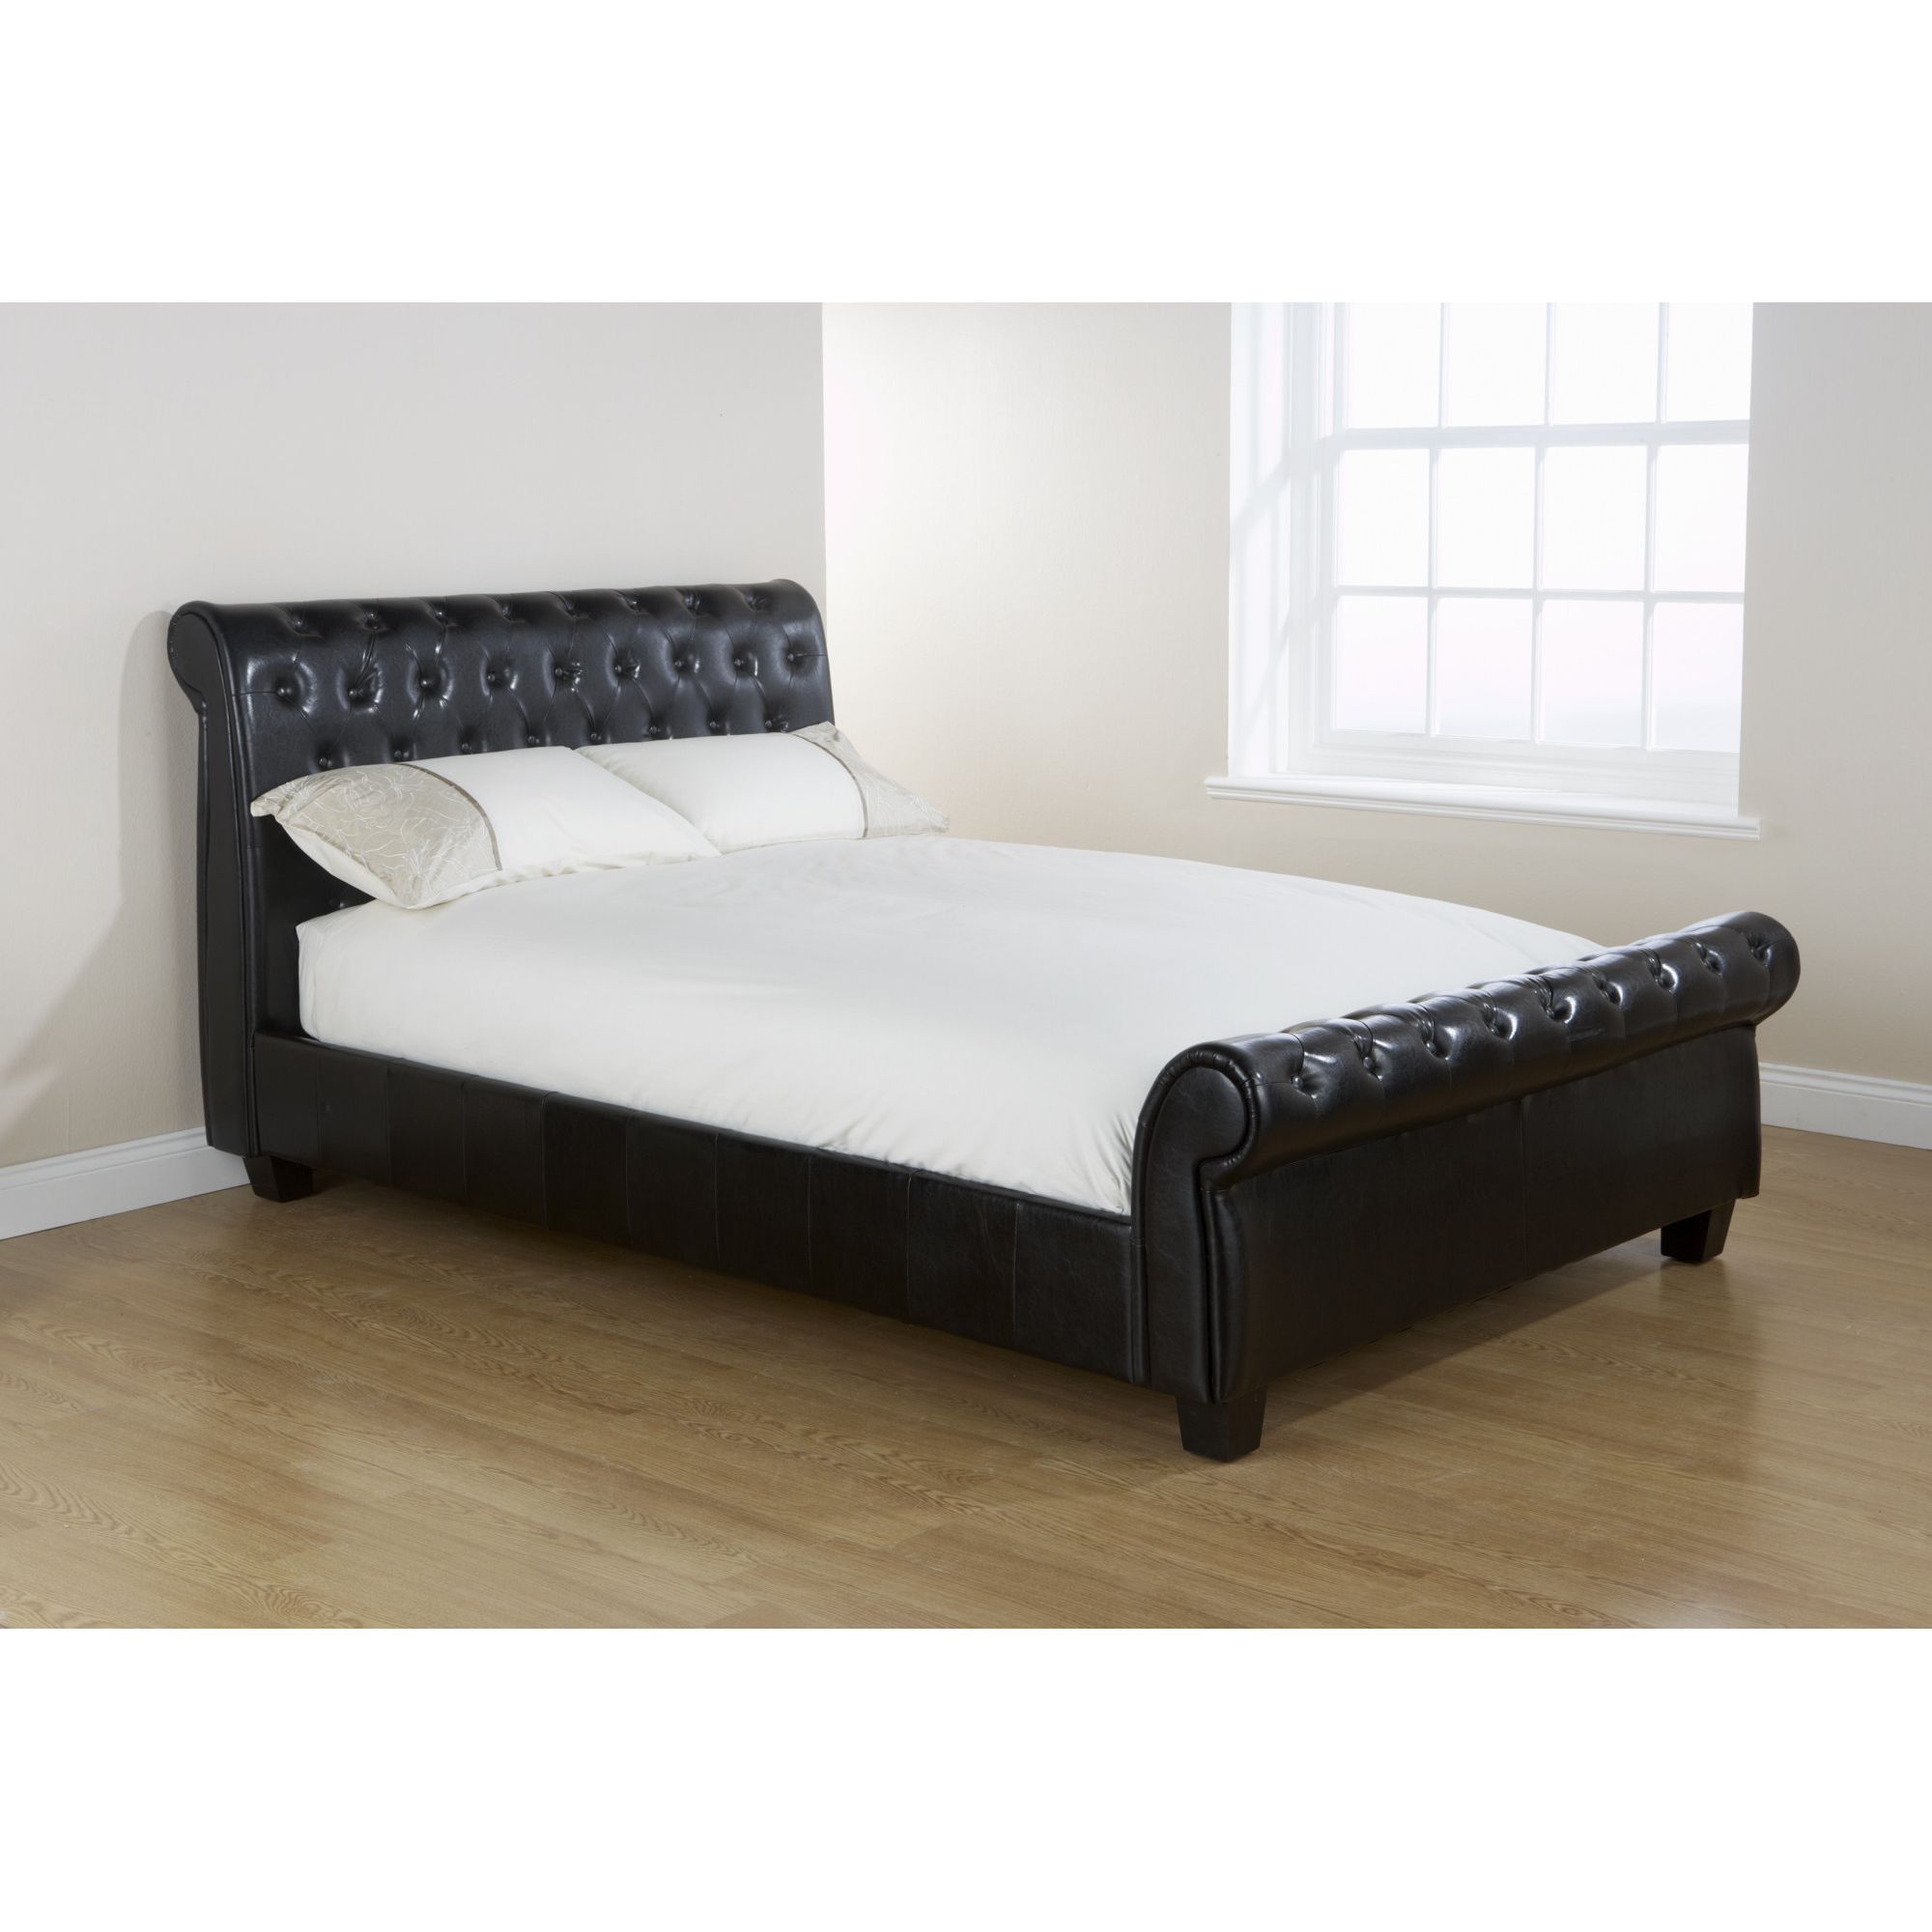 Elements Knightsbridge Button Bed - King at Tesco Direct